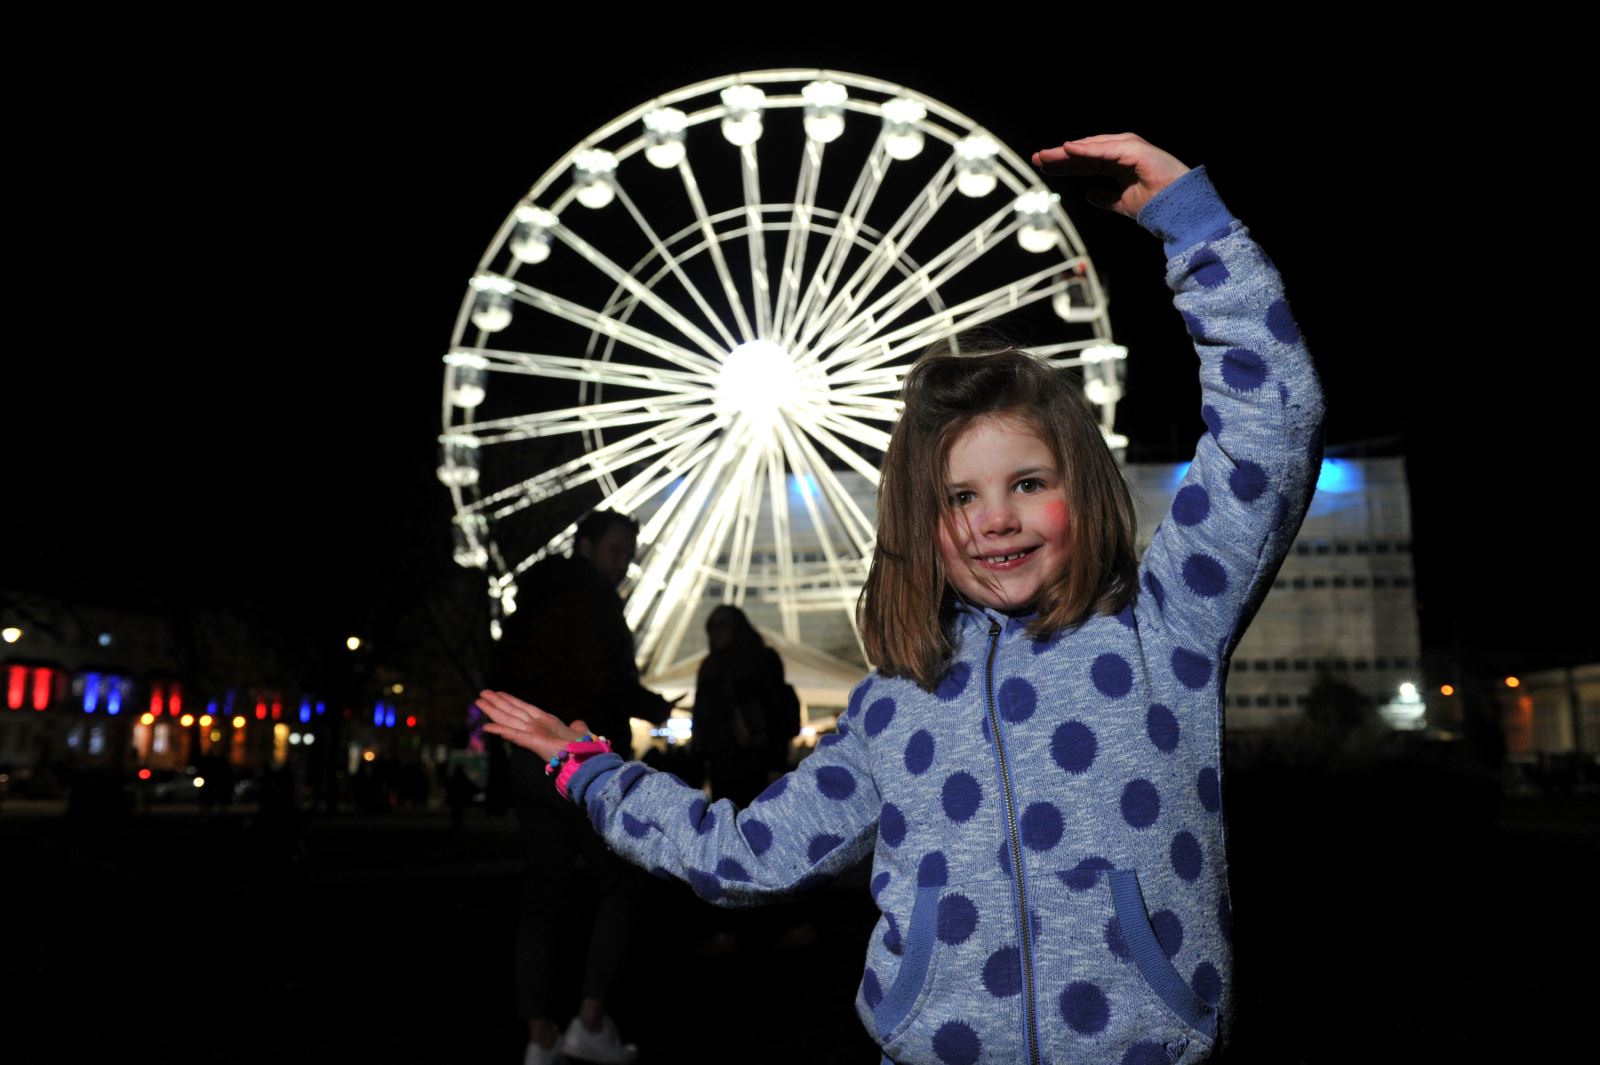 A child in front of a giant illuminated Ferris wheel